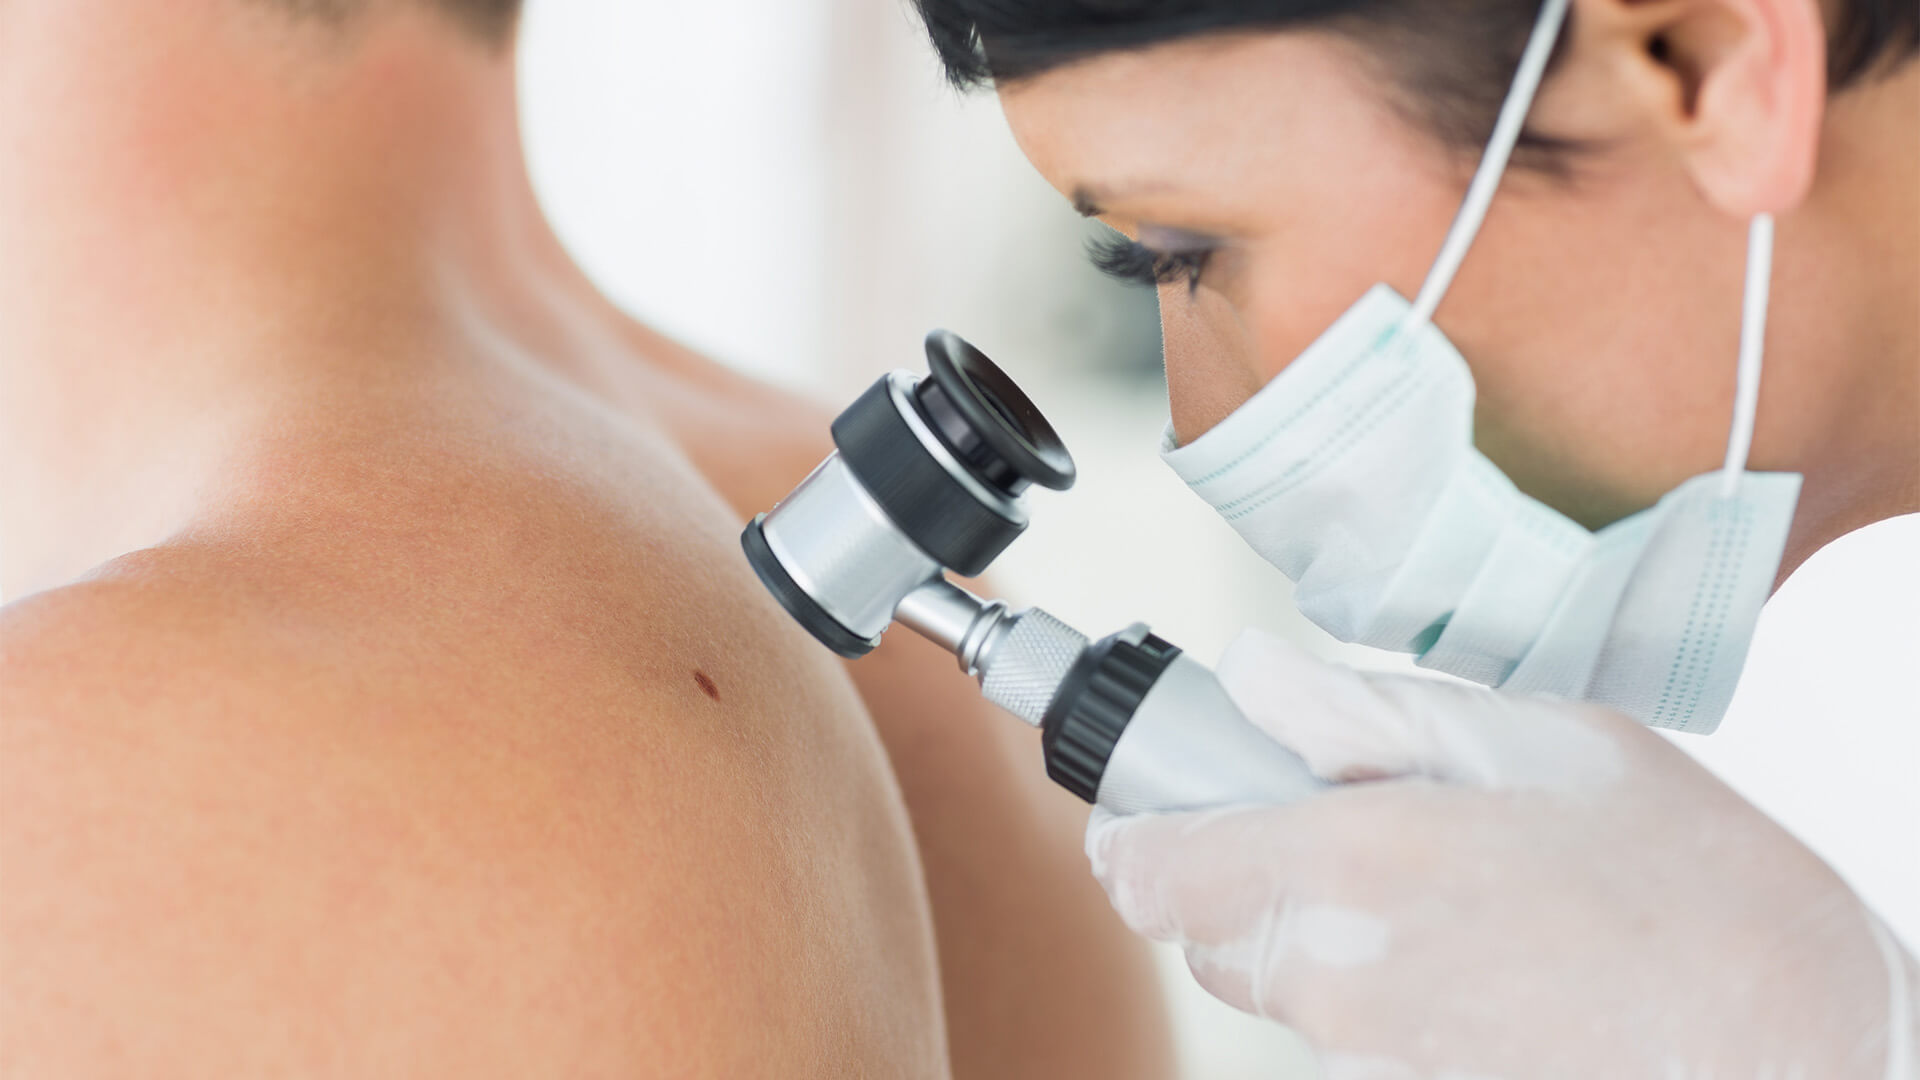 Abnormal Freckles And Moles: How to Check for Signs of Skin Cancer